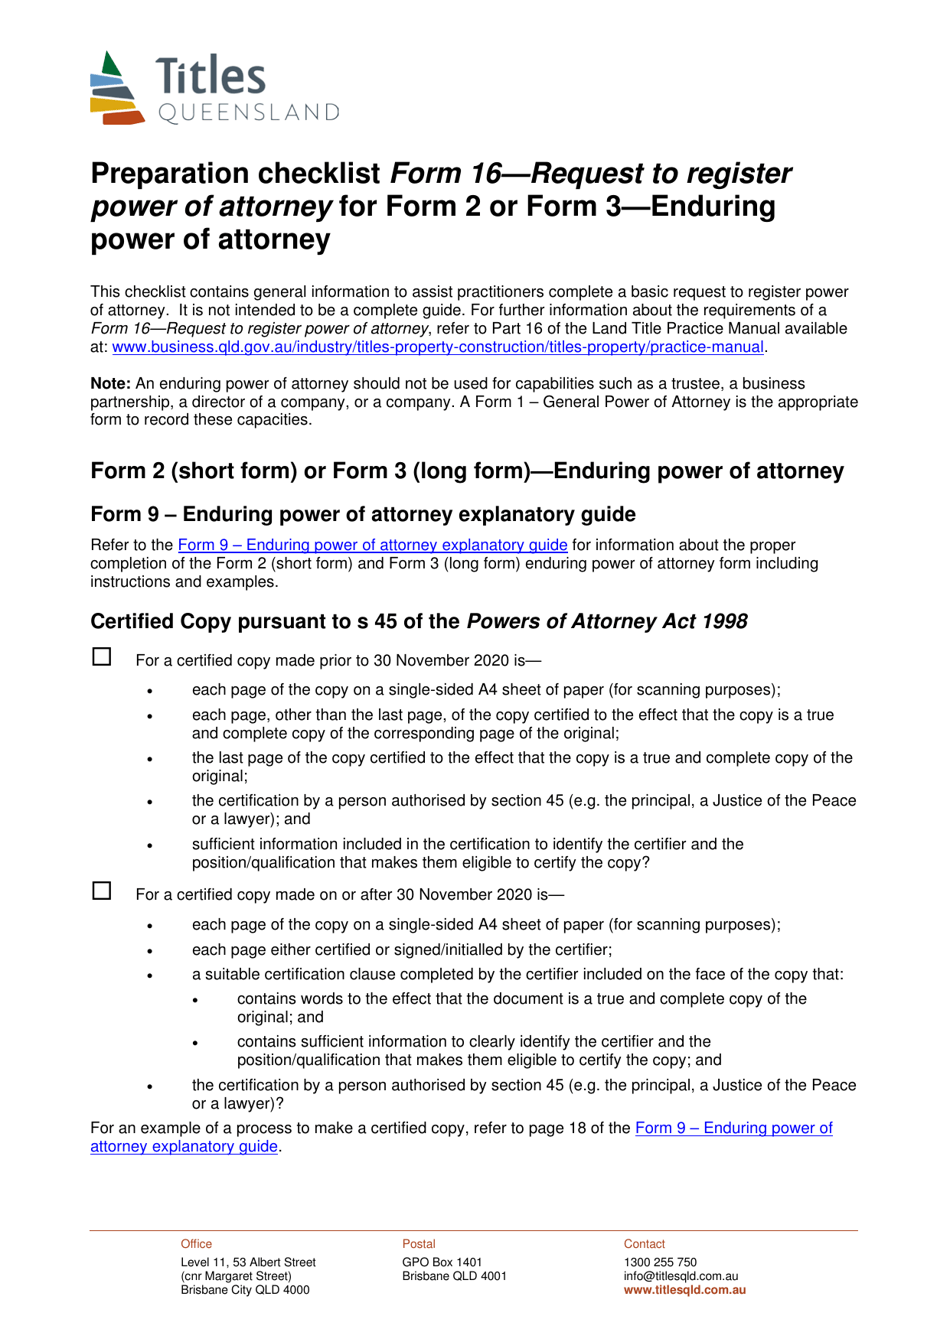 Form 16 Preparation Checklist - Request to Register Power of Attorney for Form 2 or Form 3 - Enduring Power of Attorney - Queensland, Australia, Page 1